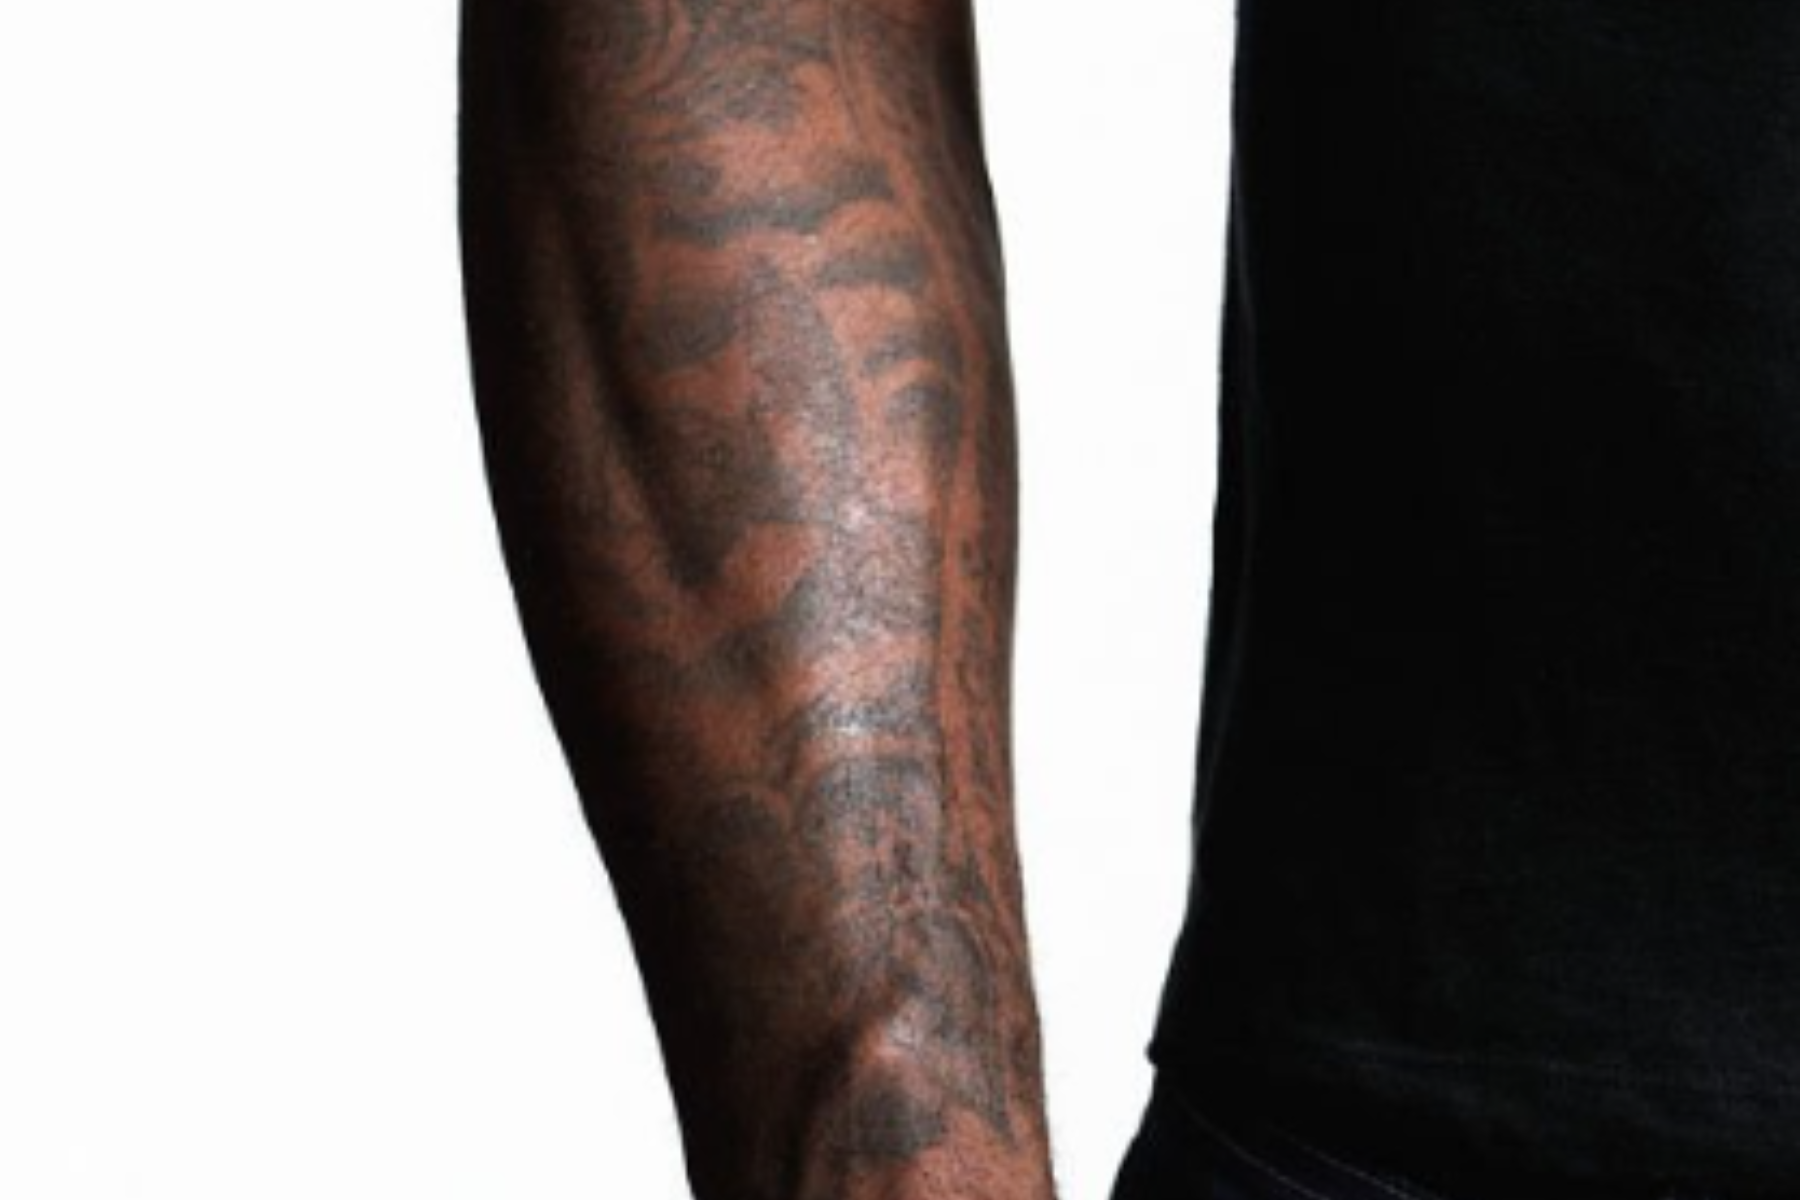 LeBron James tattooed his son's name, Bryce Maximus, on his hand